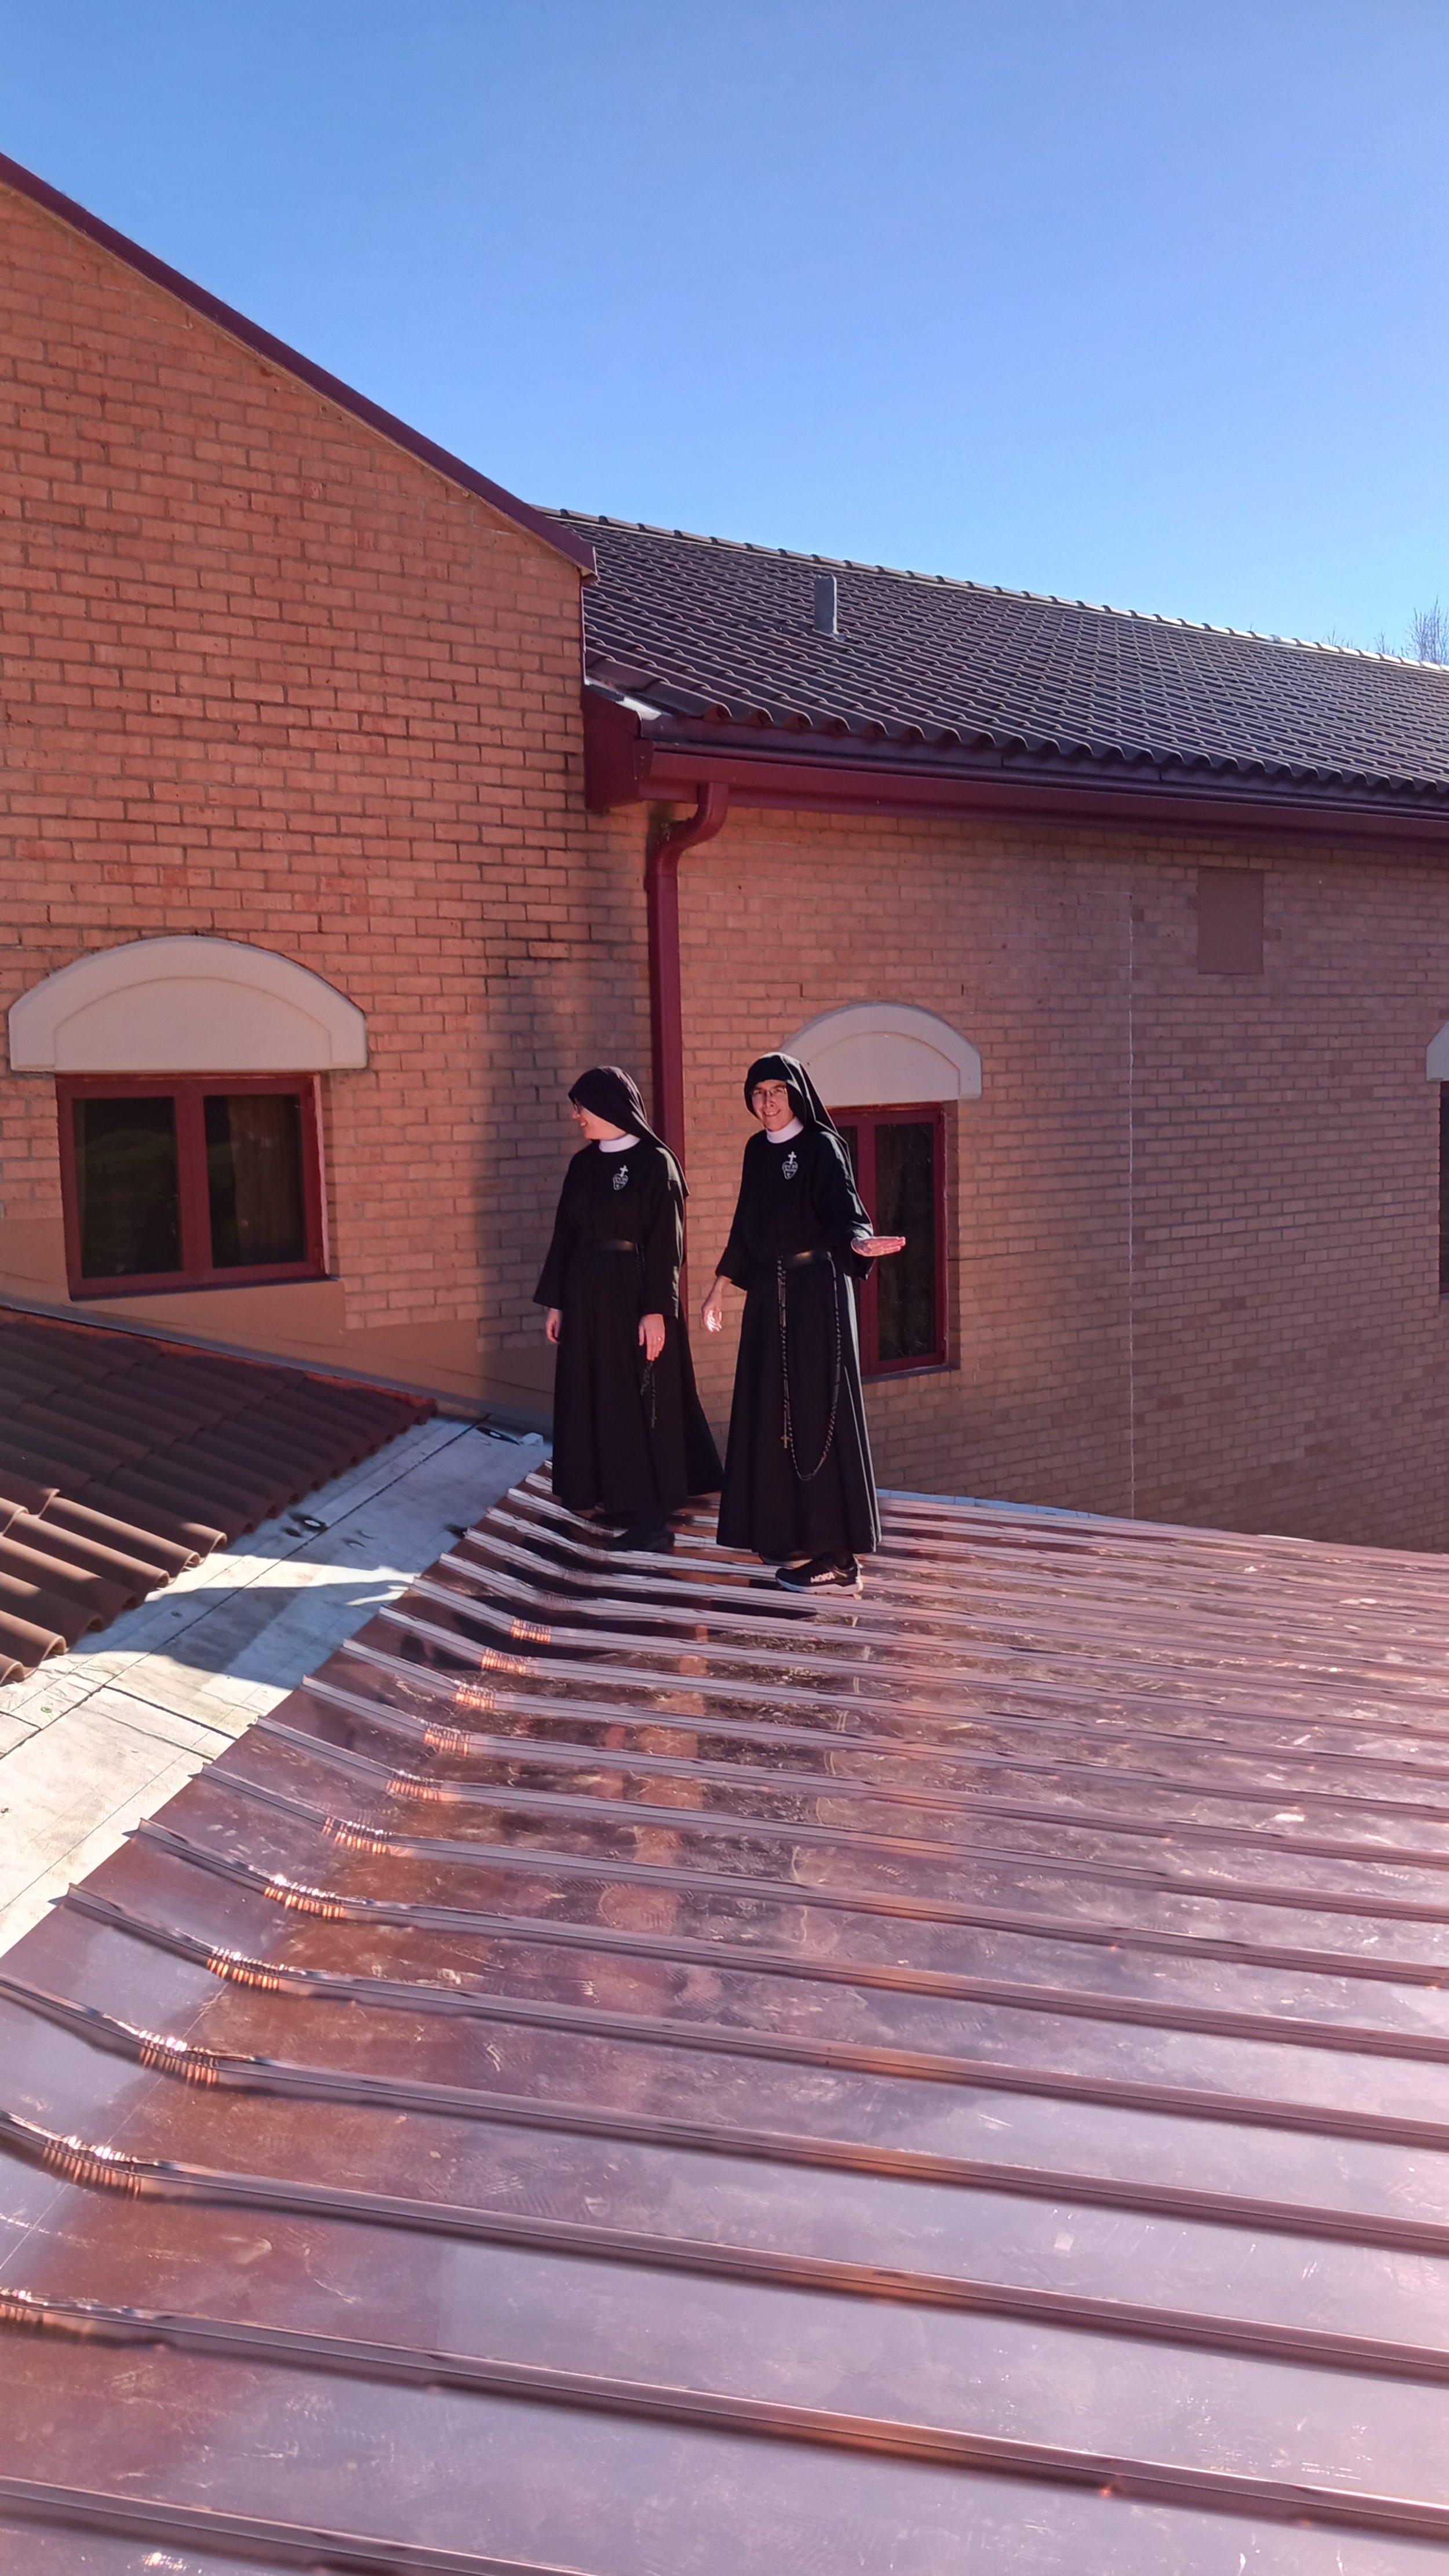  Mother John Mary and Sr. Maria Faustina both agree: that’s one shiny roof! 